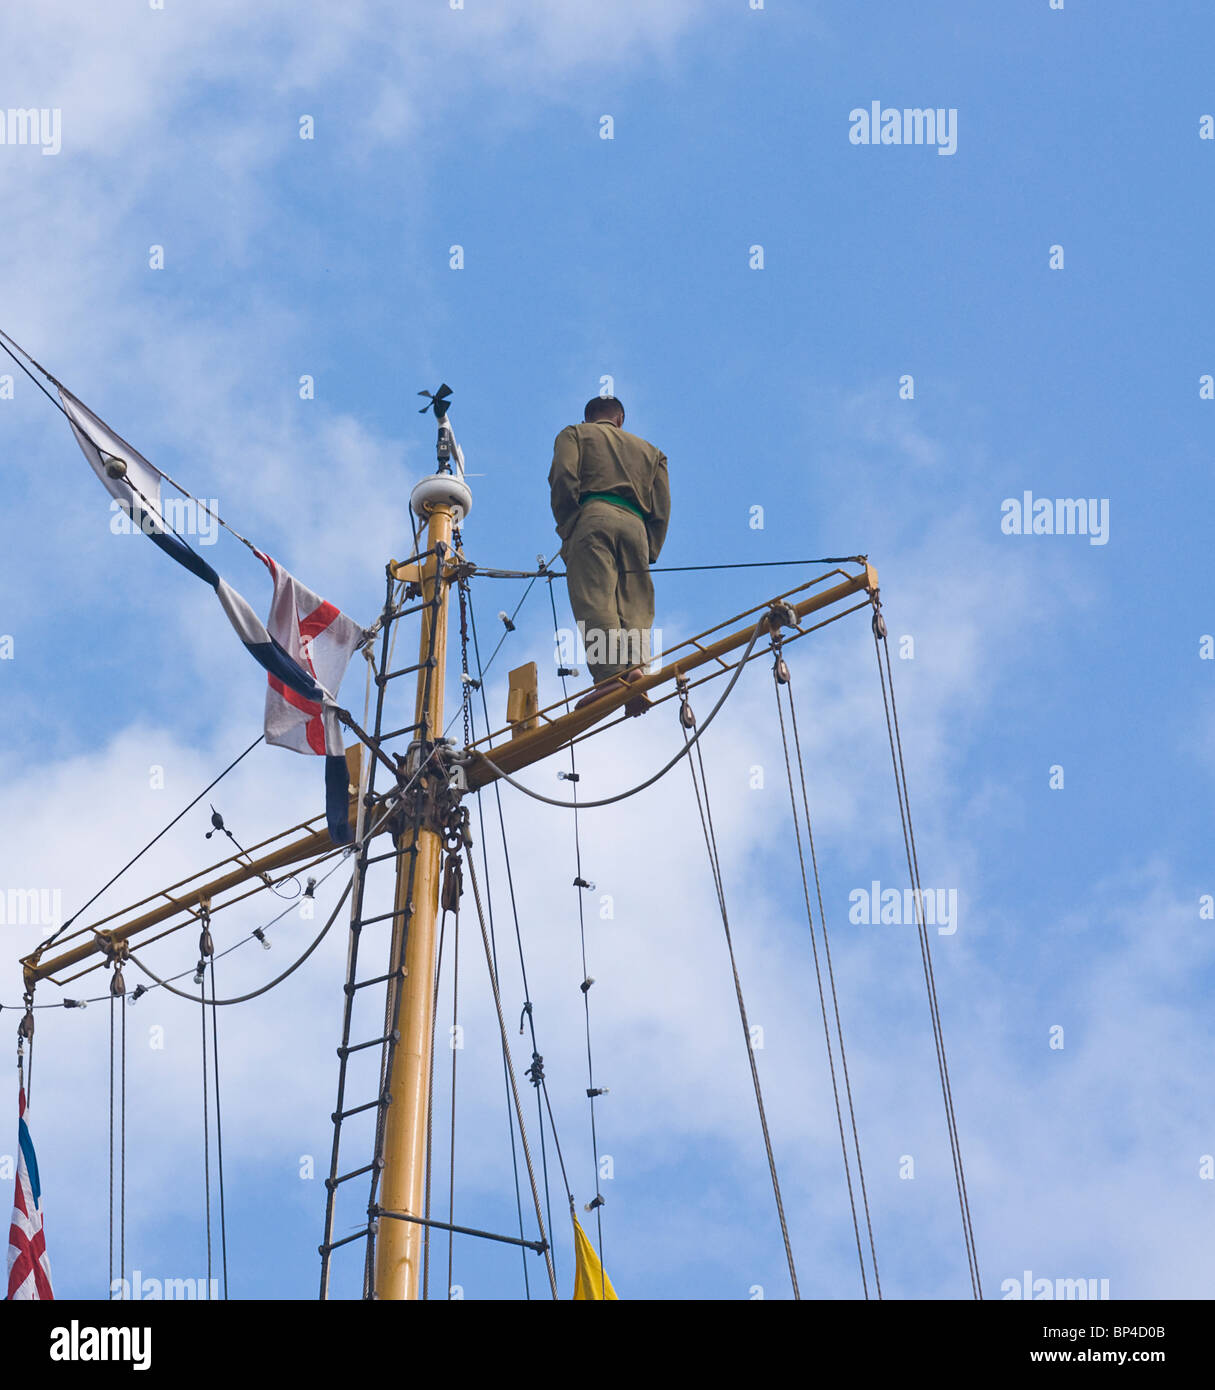 crewman standing on the top yard of the rear mast of a barquentine sailing ship (The Dewaruci) Stock Photo